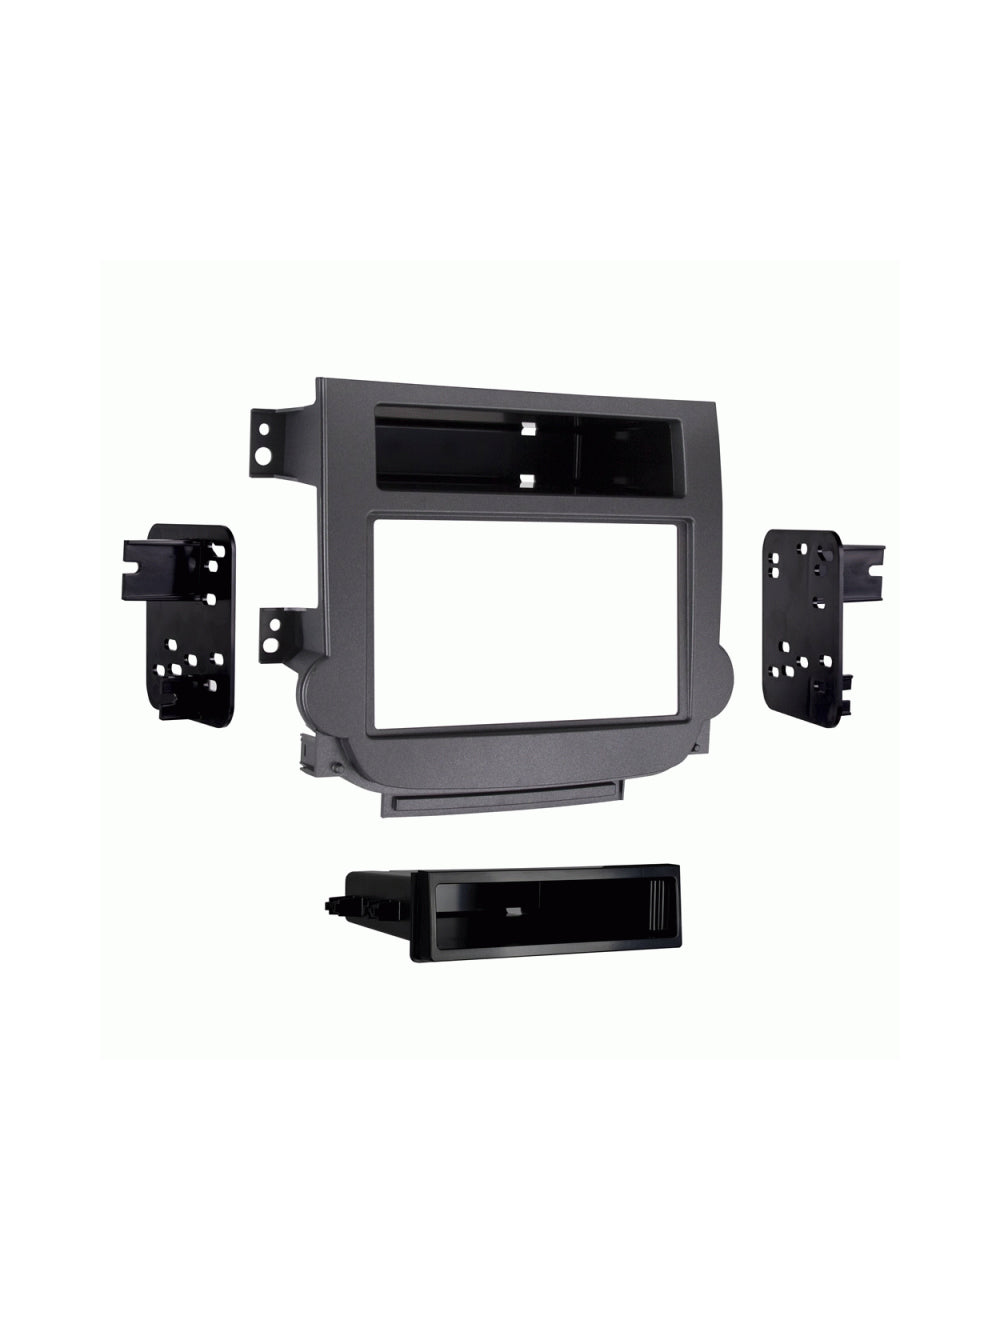 Metra 99-3314G Double DIN Dash Kit for Select 2013-Up Chevy Malibu Vehicles Gray